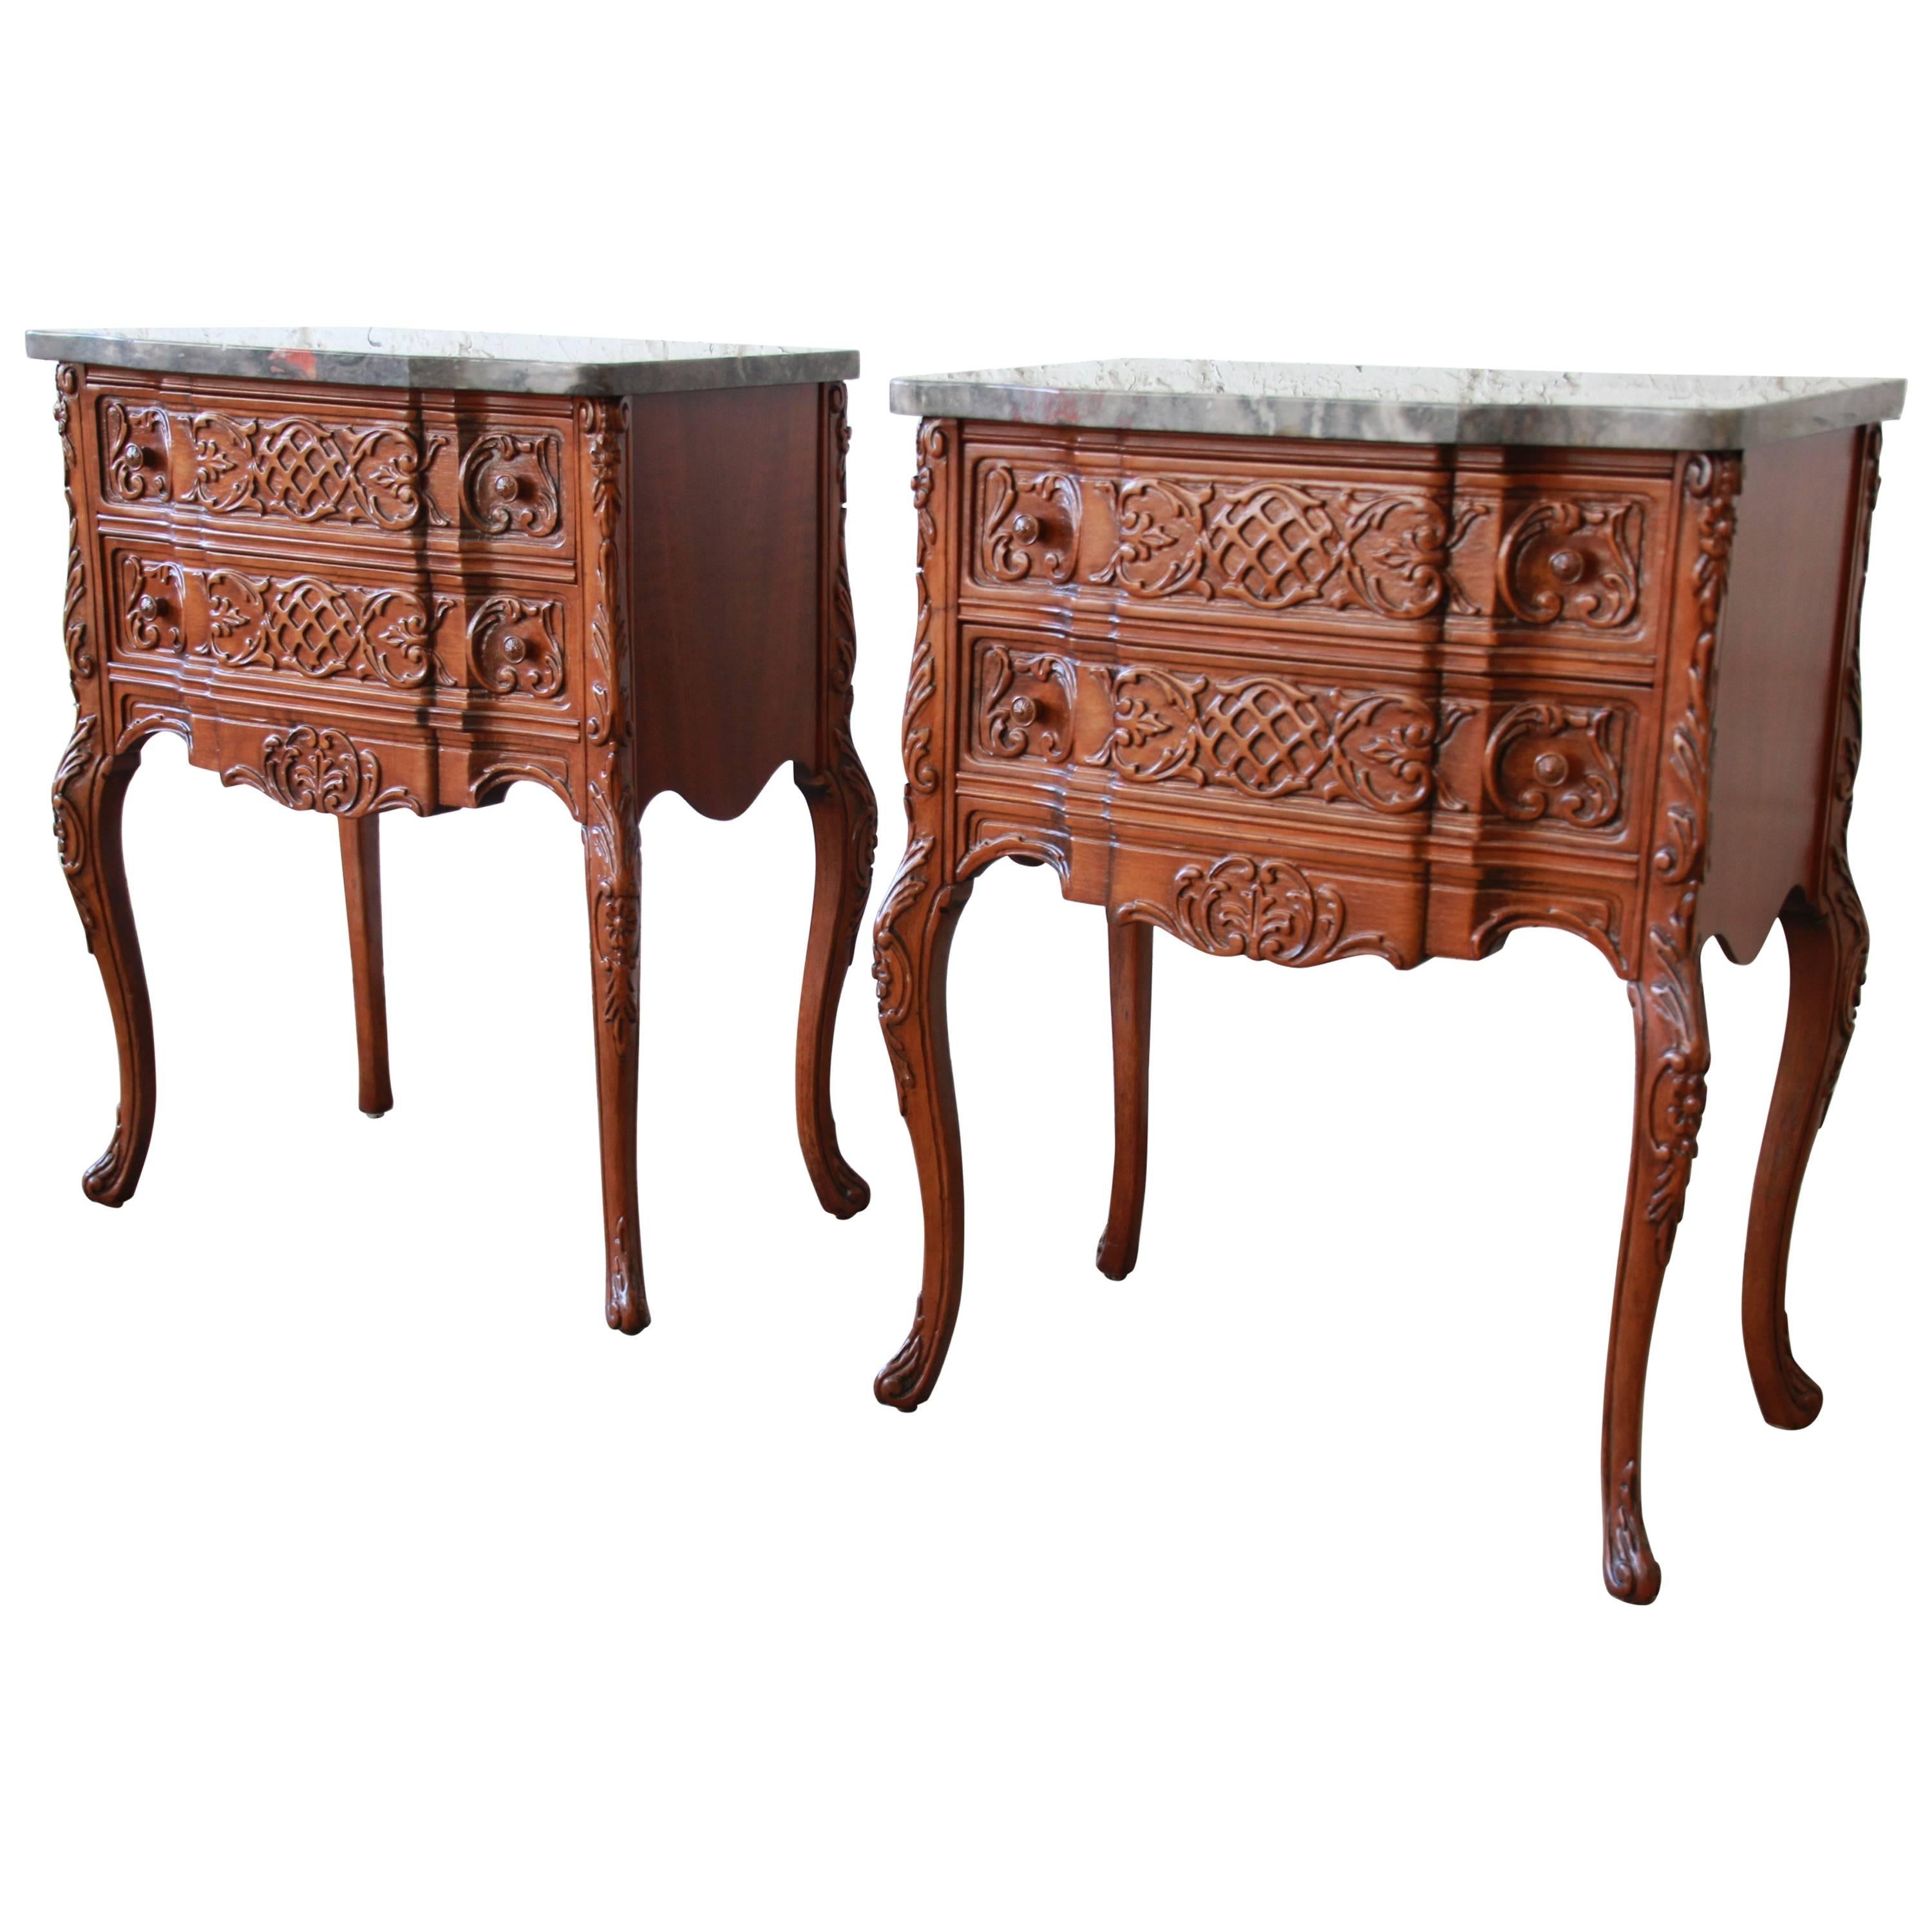 Pair of Carved French Louis XV Style Marble Top Nightstands, circa 1920